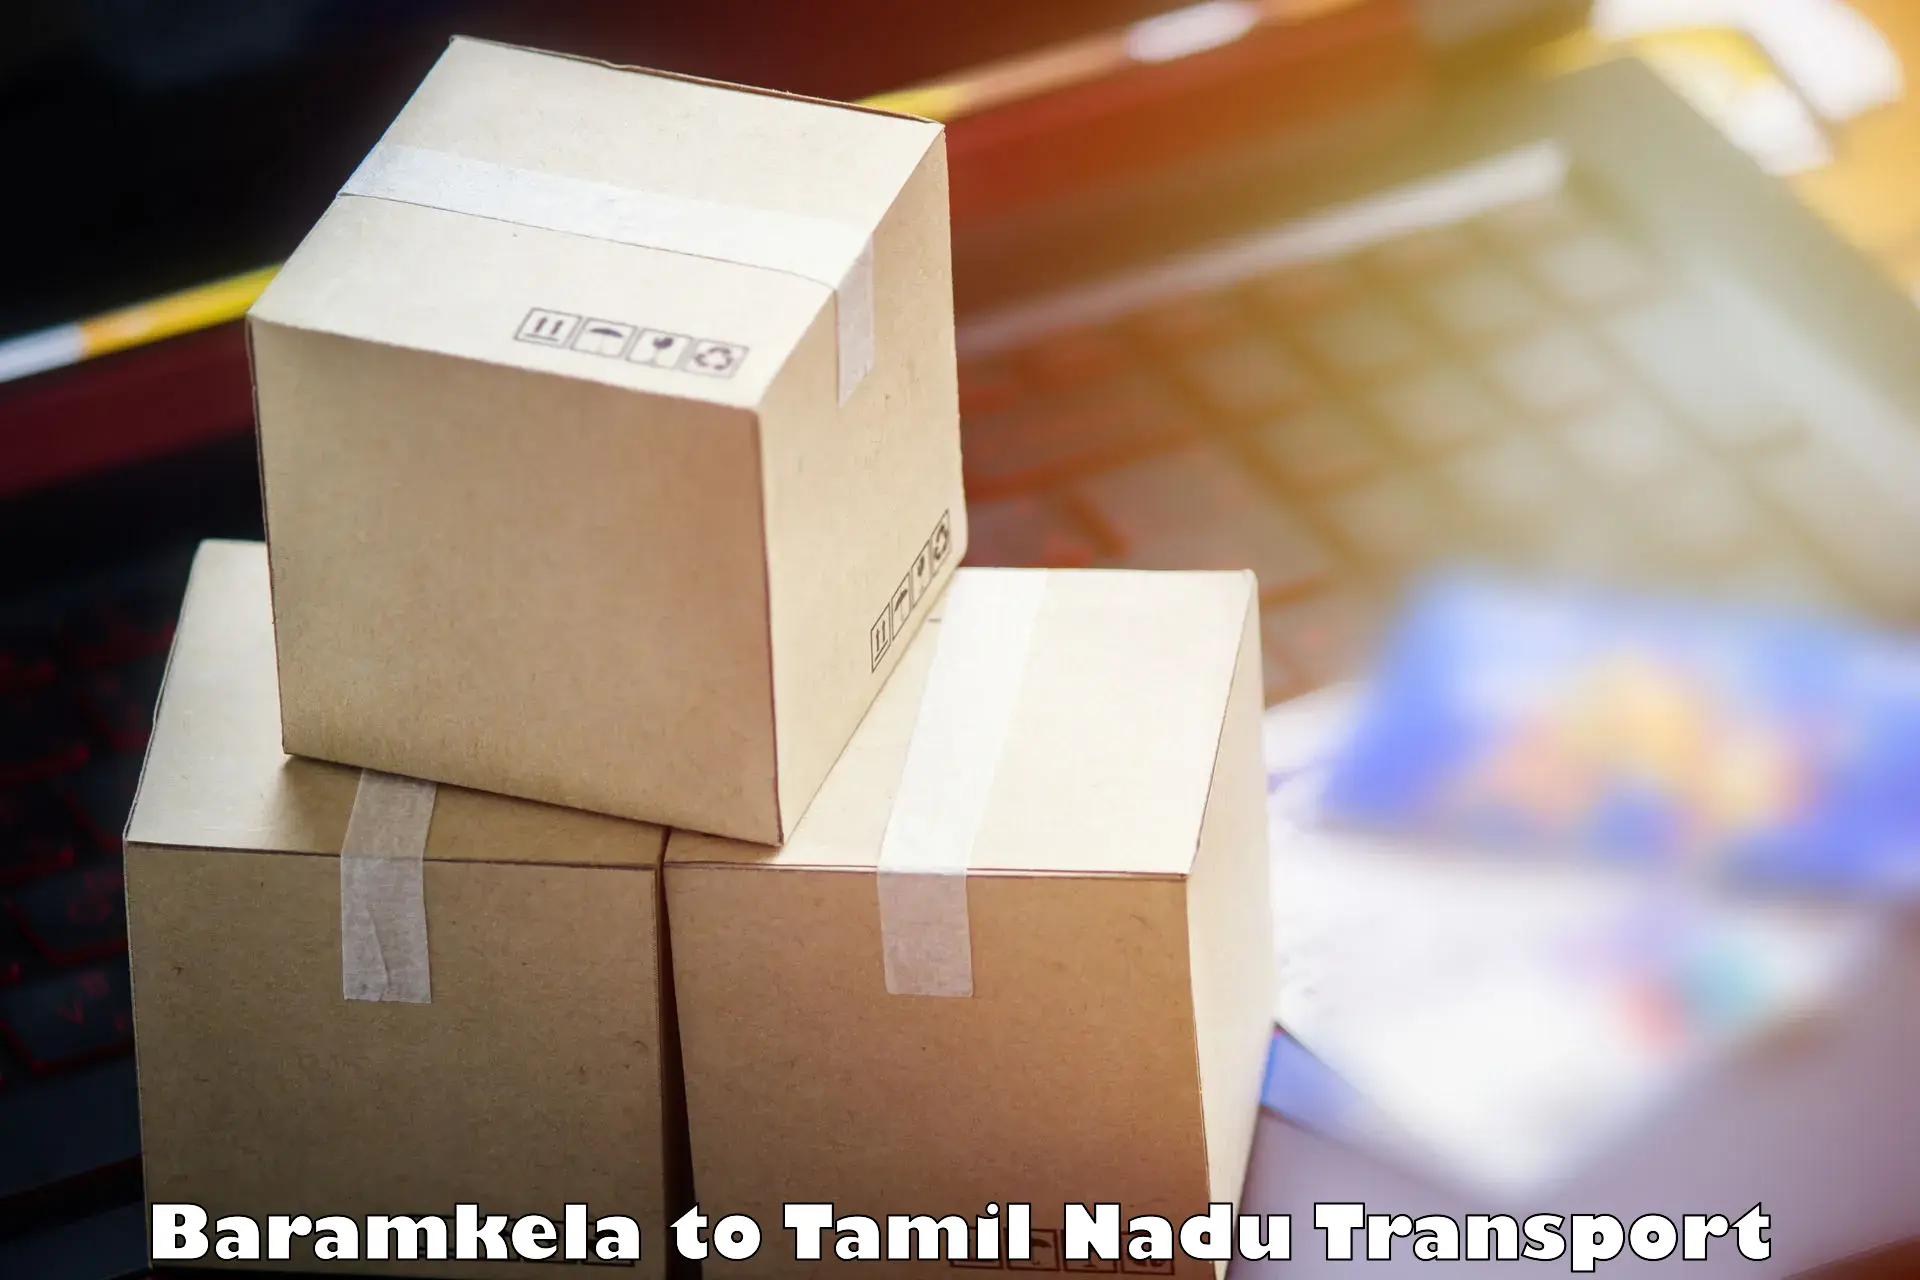 Luggage transport services Baramkela to Shanmugha Arts Science Technology and Research Academy Thanjavur